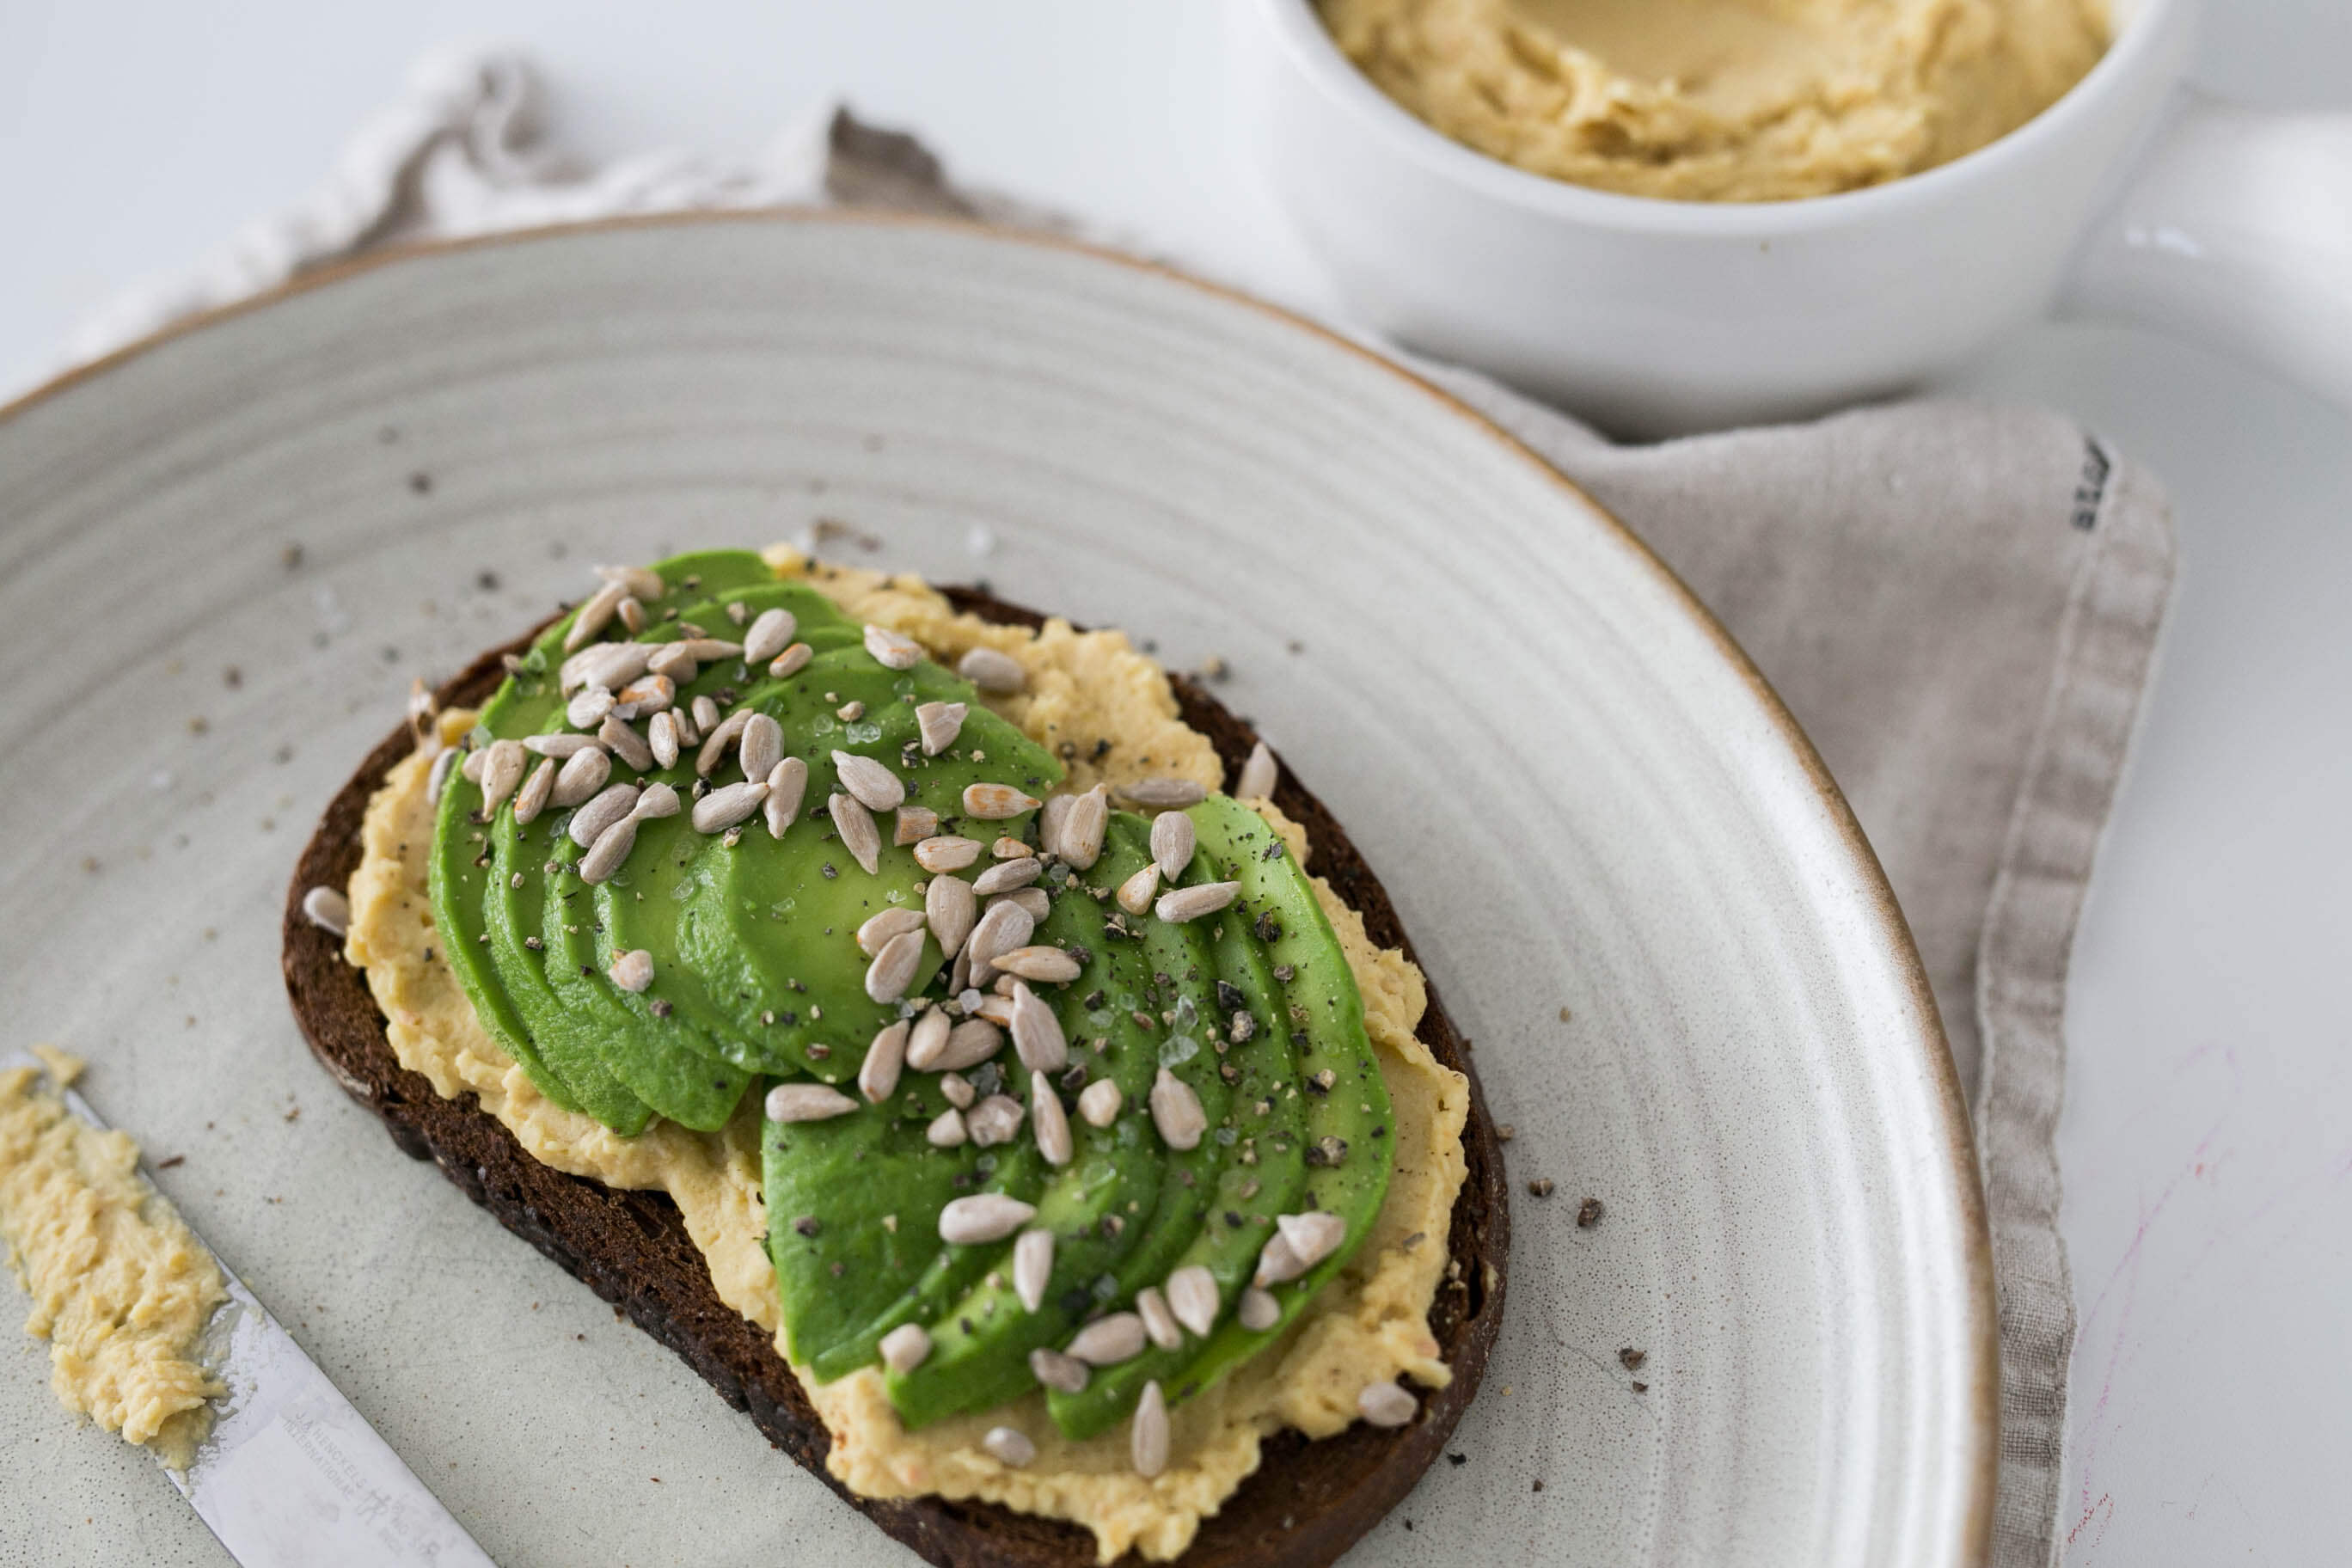 20 Meal Ideas to Help Clients Manage Arthritis: Hummus Toast with Avocado